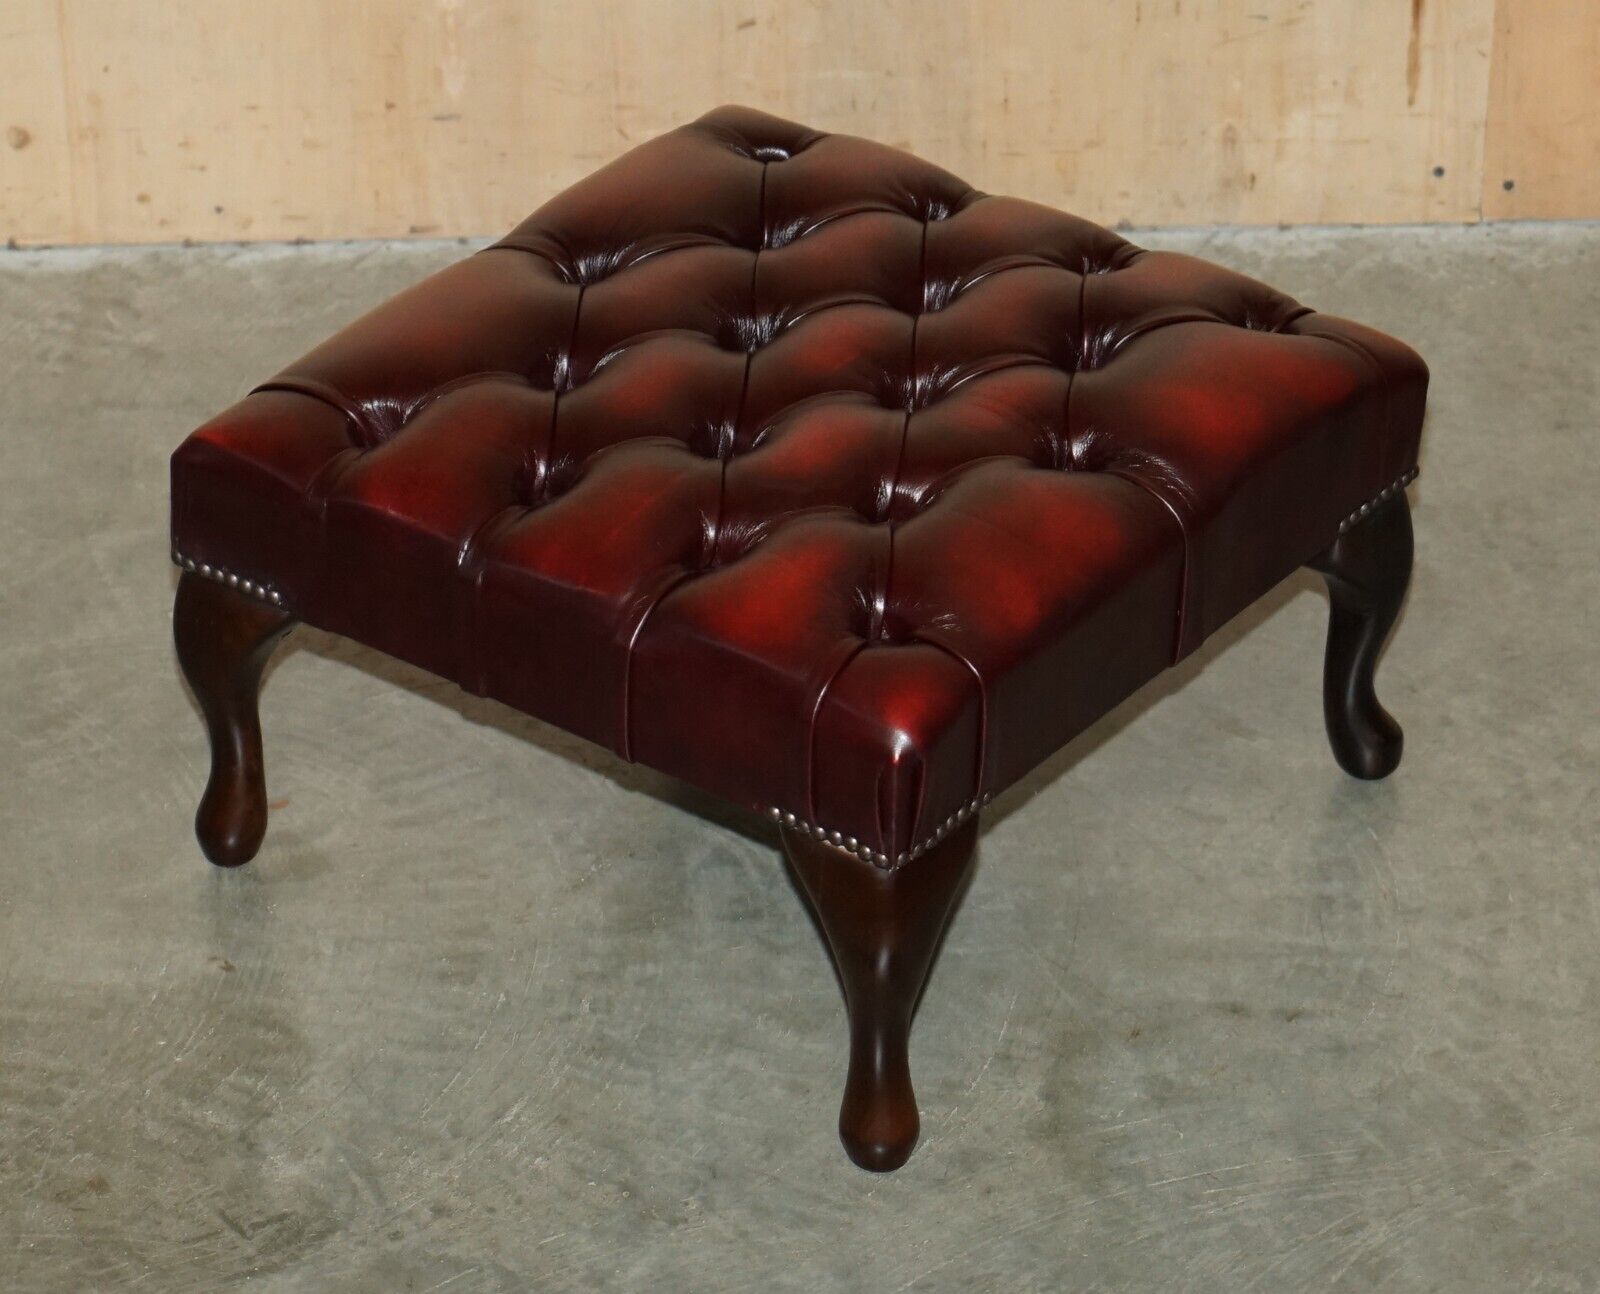 VINTAGE OXBLOOD LEATHER CHESTERFIELD TUFTED OTTOMAN FOOTSTOOL FOR WINGBACK CHAIR